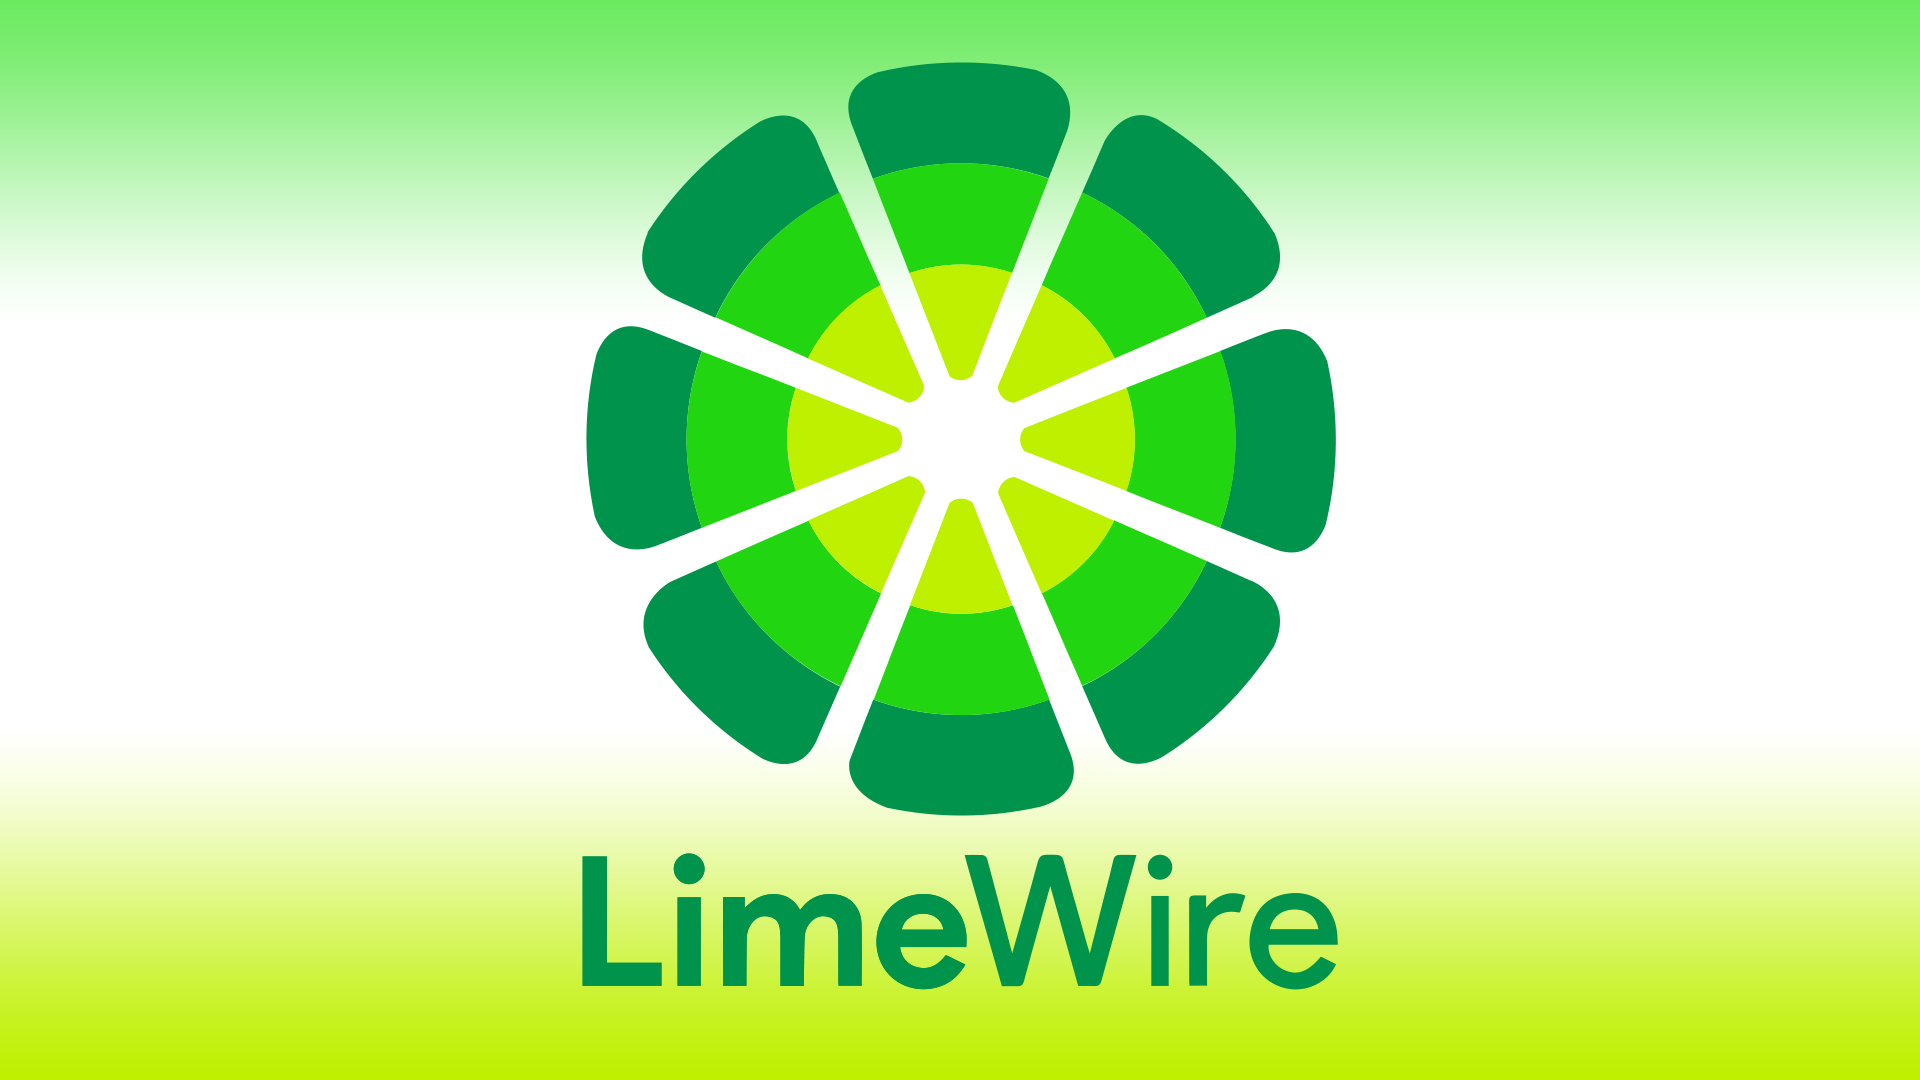 After Being Shutdown For Over A Decade, LimeWire Is Making A Comeback